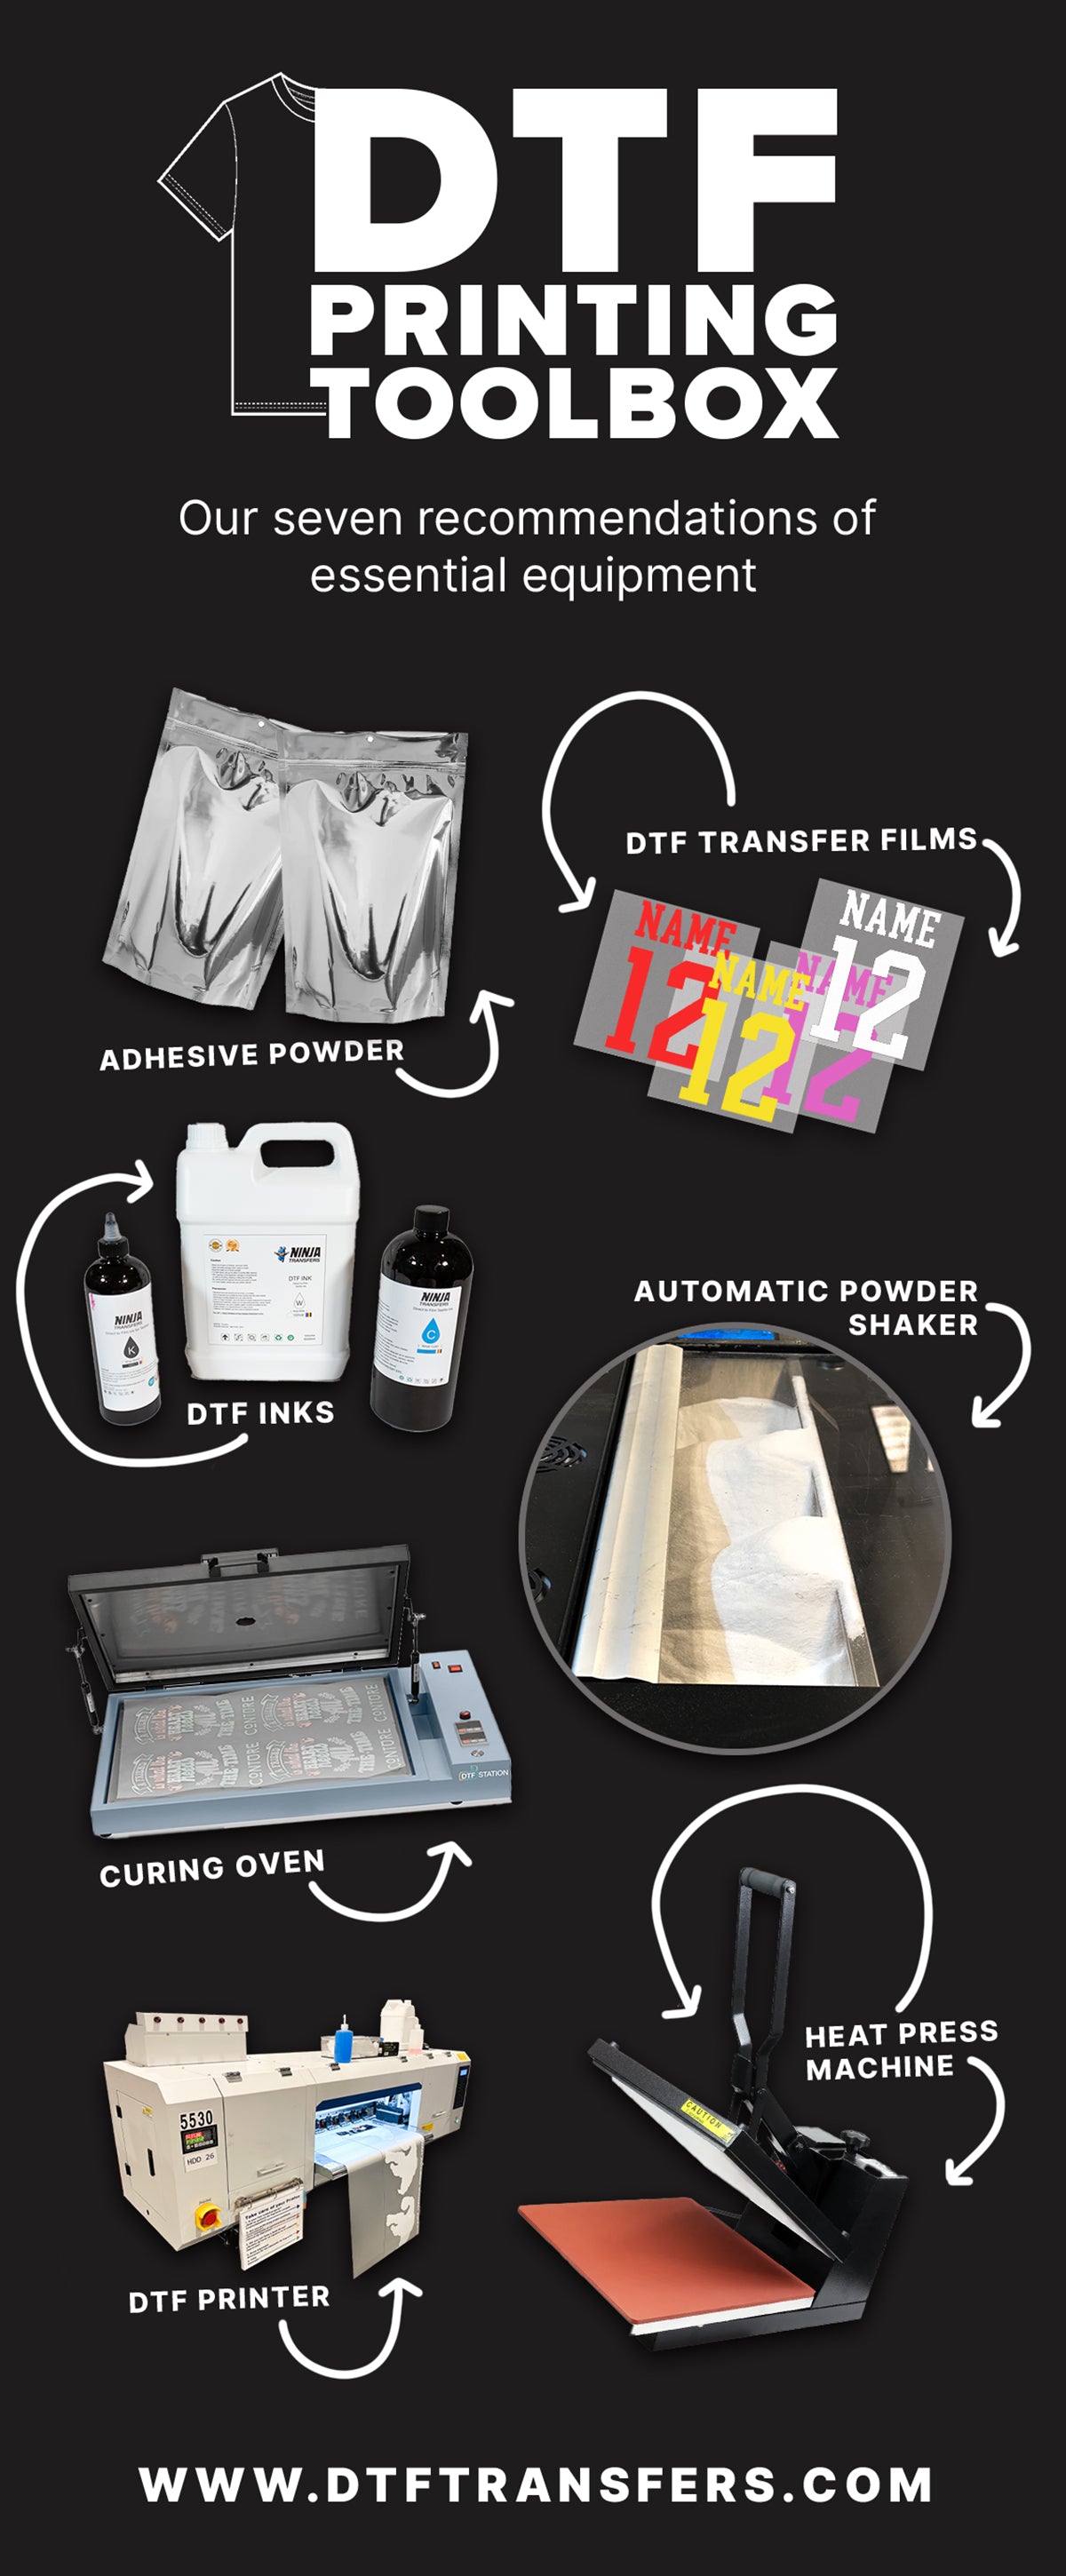 DTF Printing Essentials Infographic | Everything you need to get started DTF Printing and Pressing!